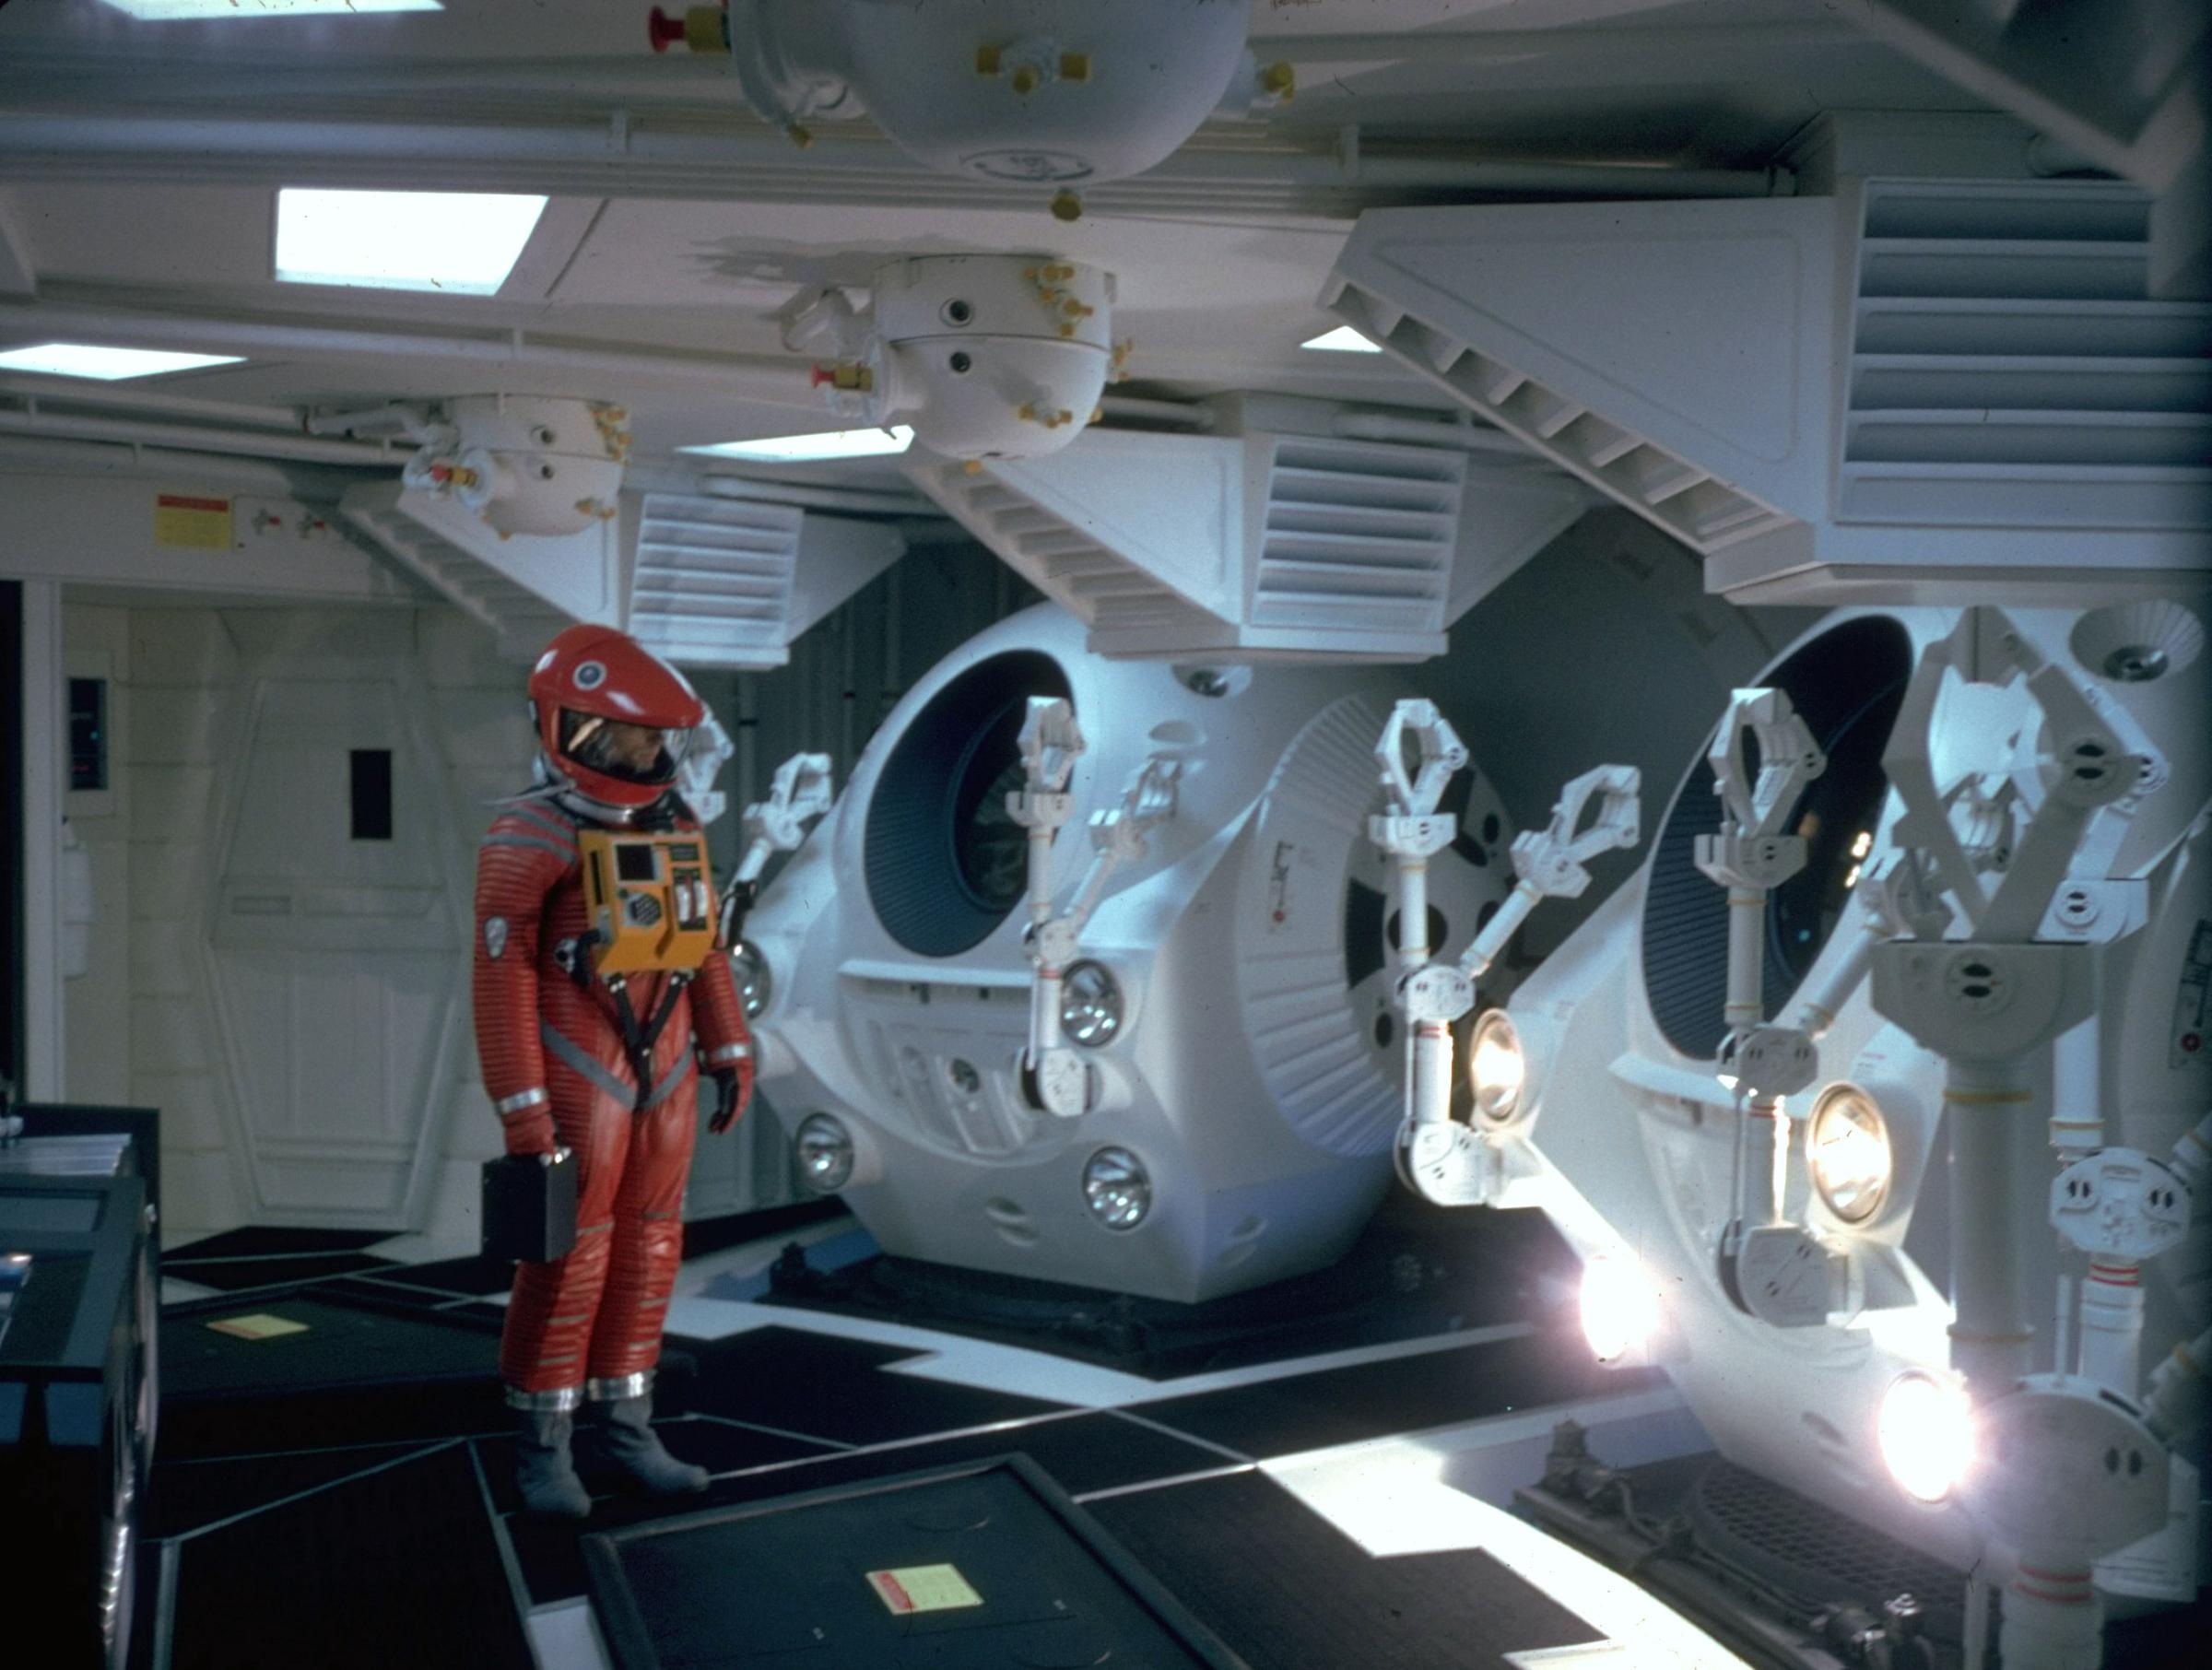 On the set of Stanley Kubrick's '2001: A Space Odyssey'